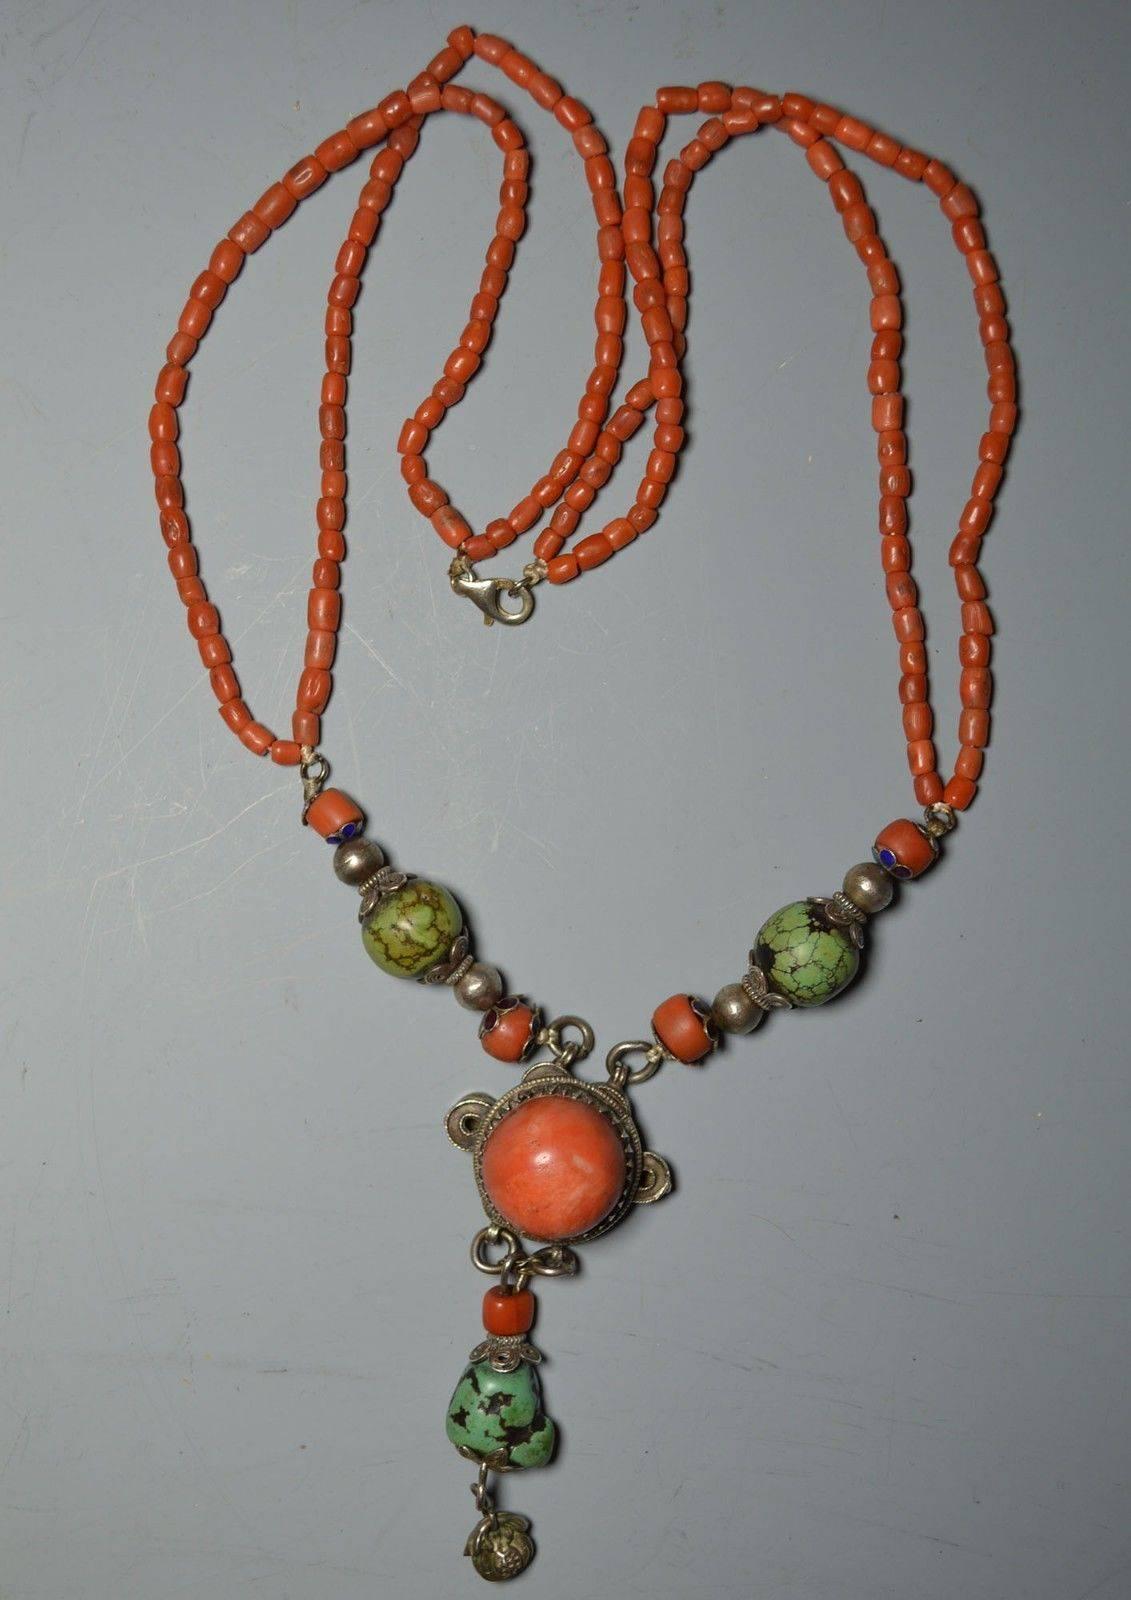 A antique silver coral and turquoise necklace Yunnan Tibet
Rare necklace with real antique salmon coral beads with genuine turquoise and silver
Nice wearable antique piece in fine condition
Period late 19th-early 20th century
Size 36 cm, 14